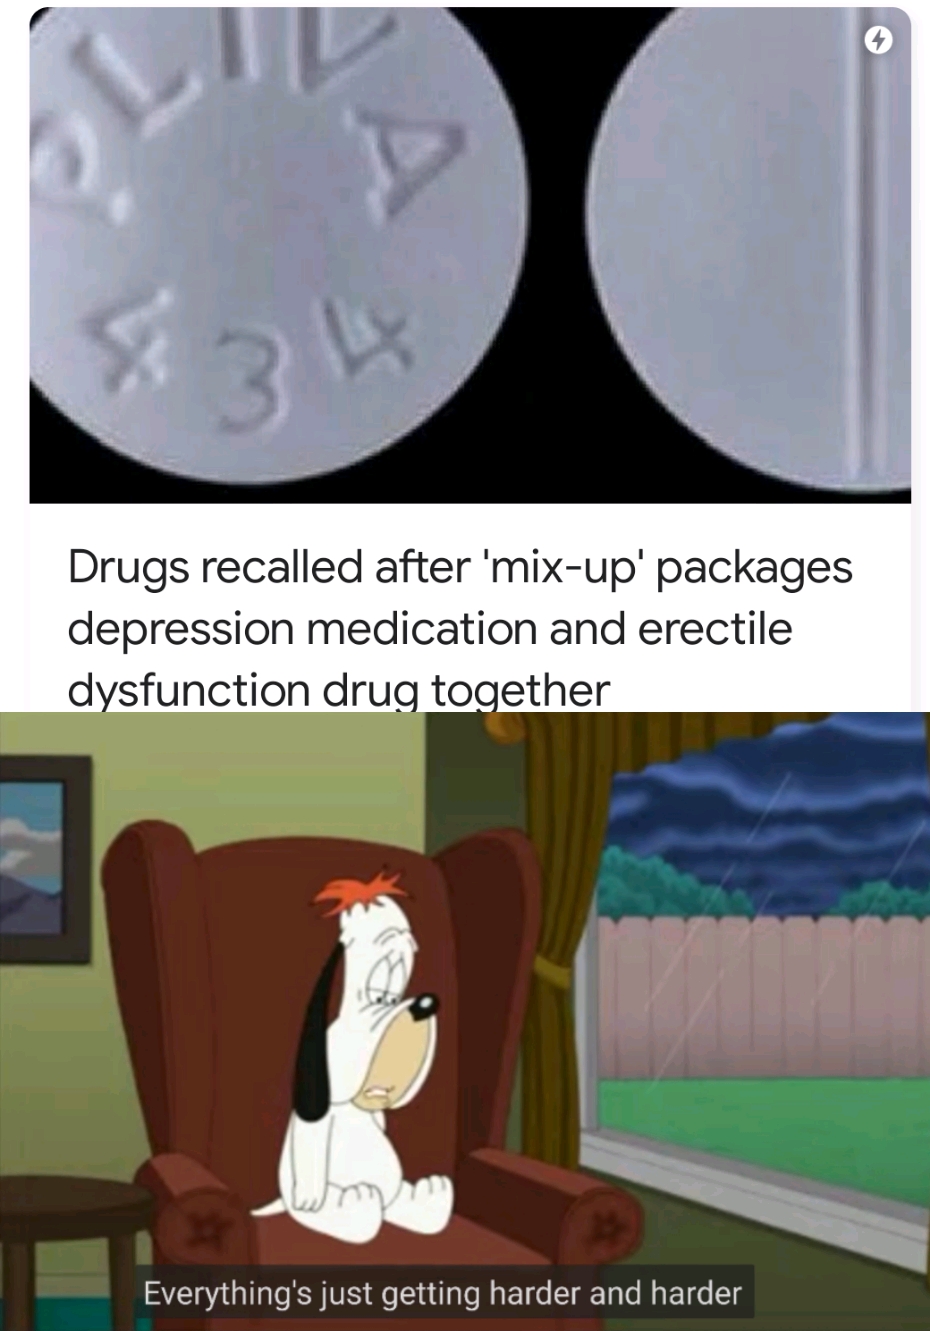 cartoon - Drugs recalled after 'mixup' packages depression medication and erectile dysfunction drug together Everything's just getting harder and harder